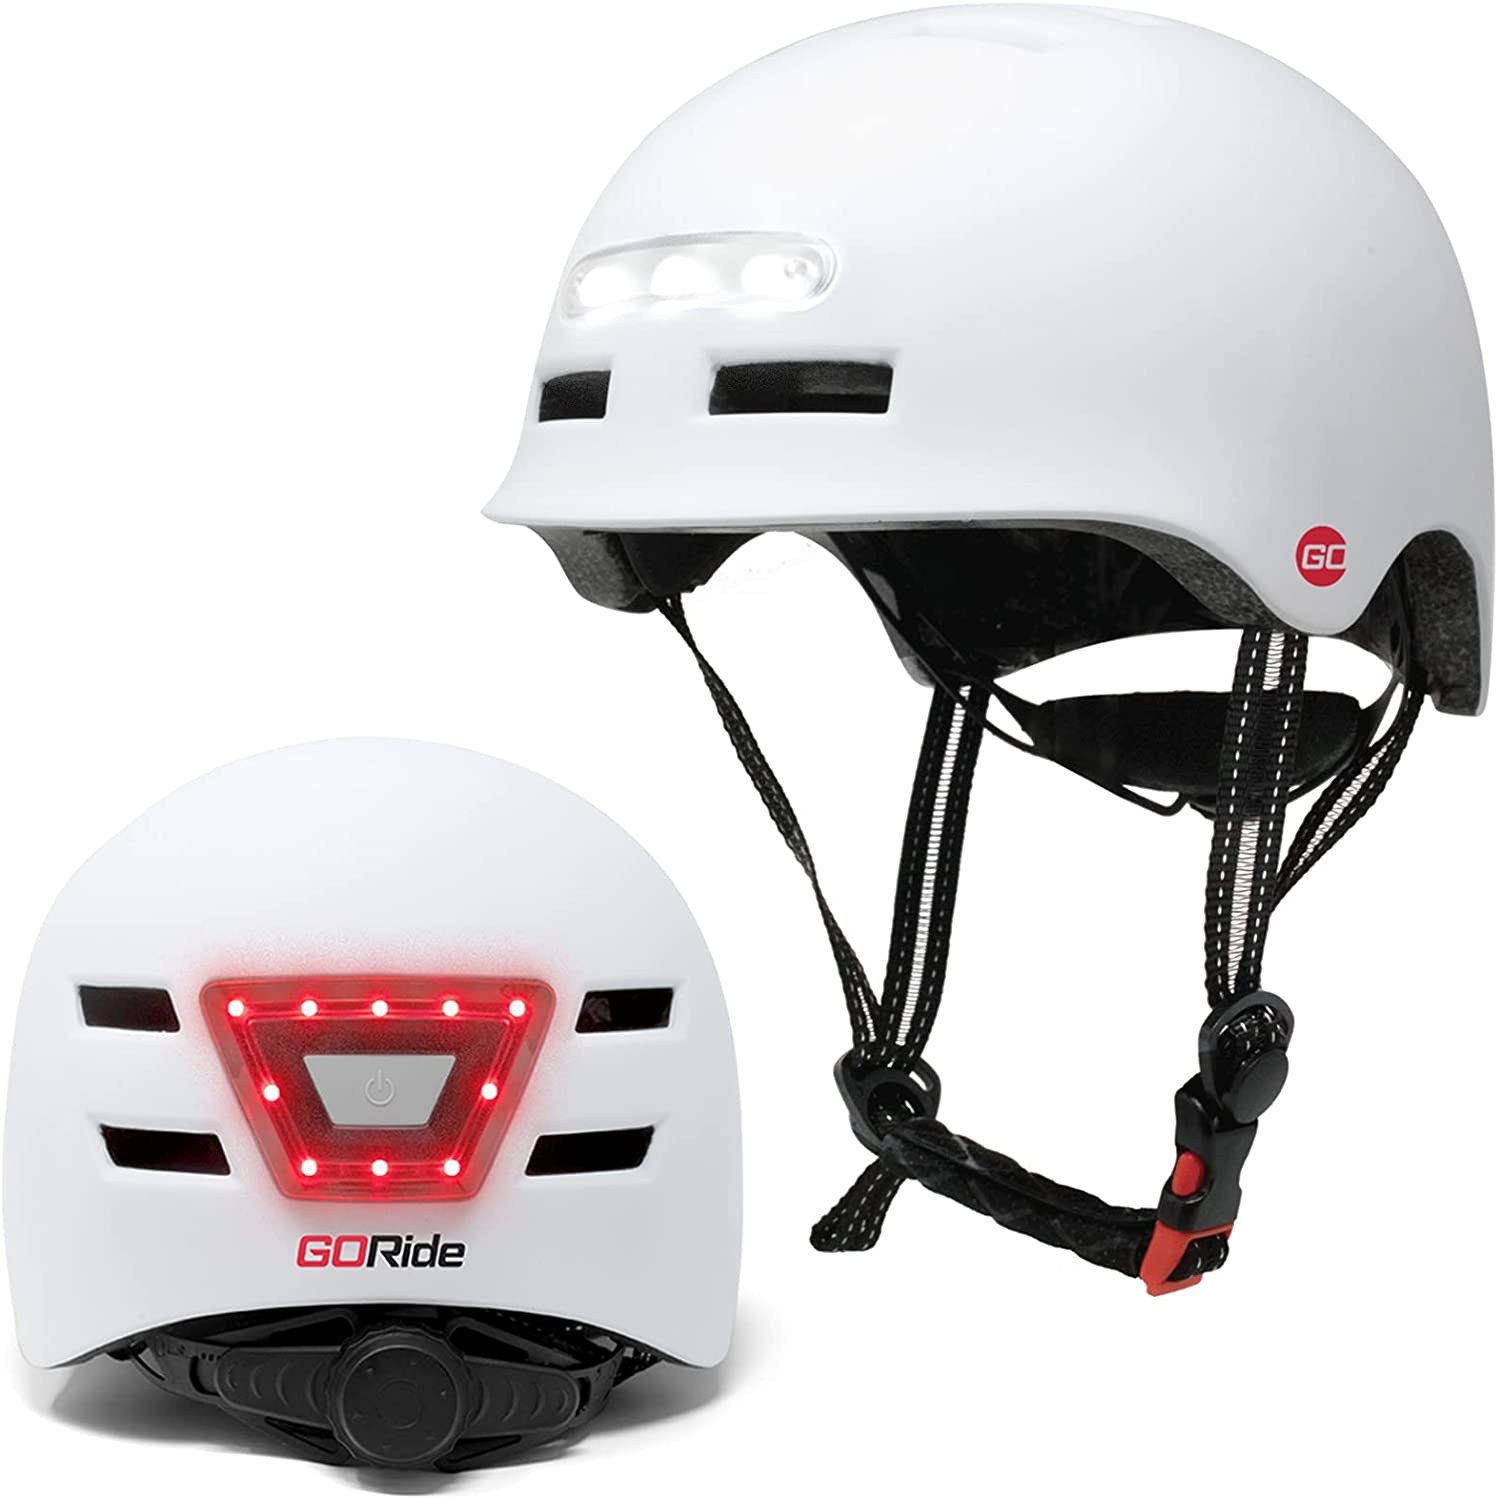 GoRide LED Bike Helmet, USB Rechargeable LED Lights & Adjustable Chin Strap for Men, Women, and Youth Helmets. Perfect for The Urban Commuter